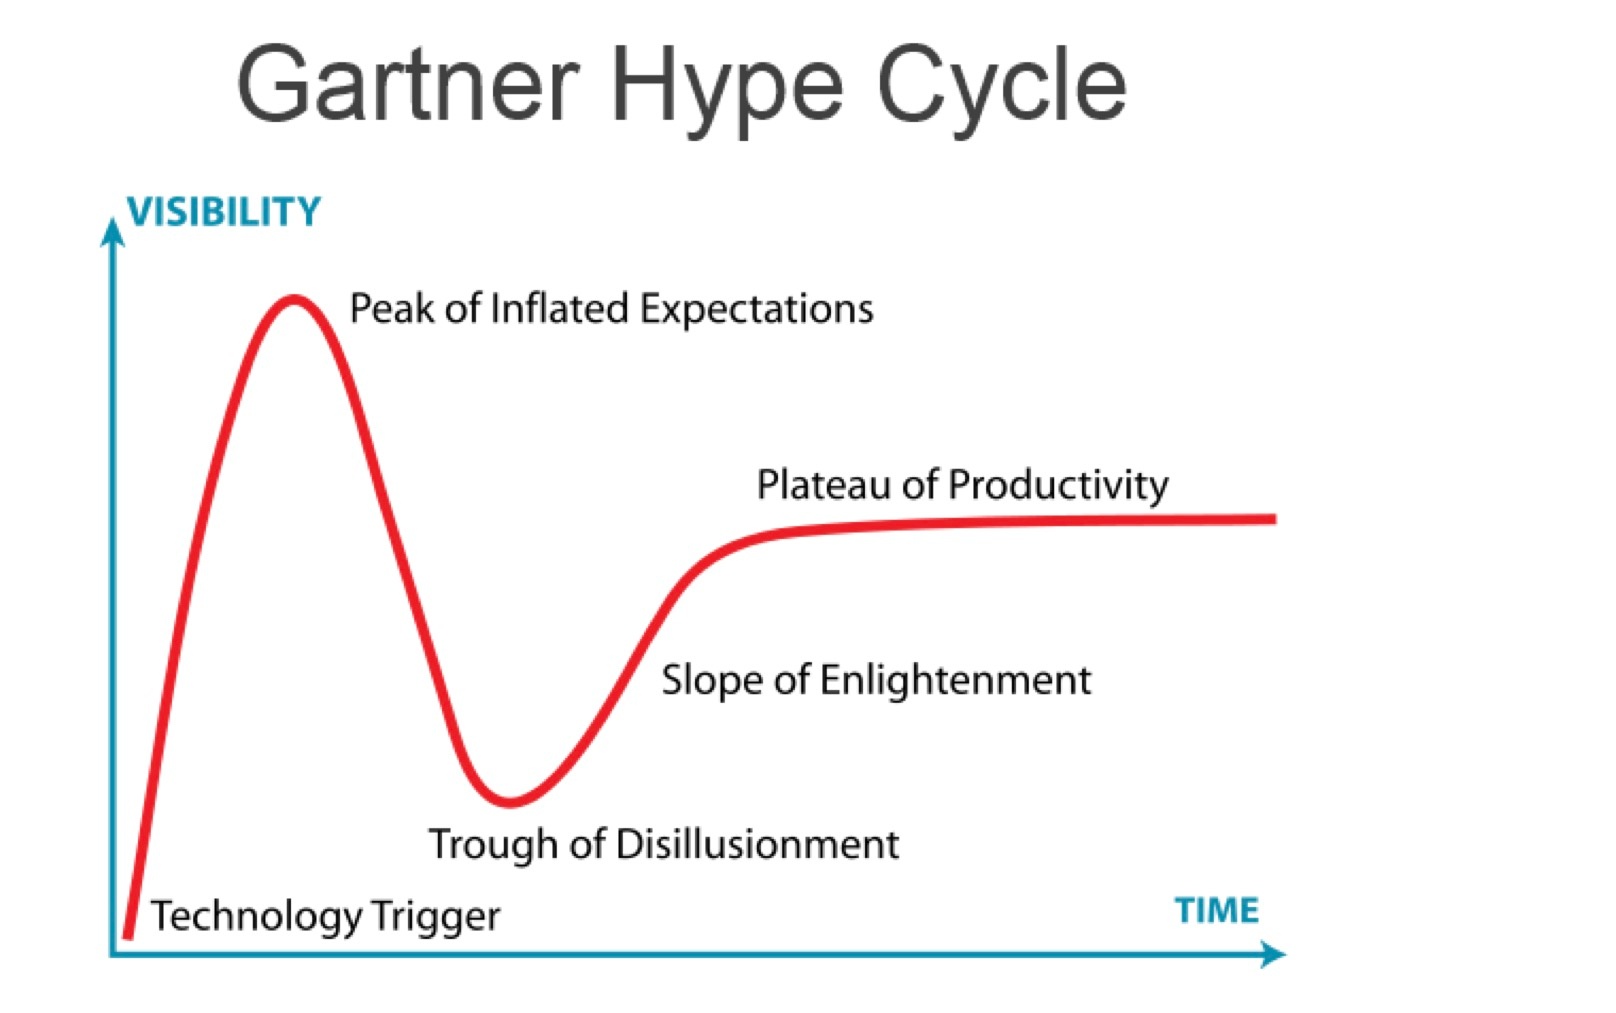 5 Stages of the Hype Cycle